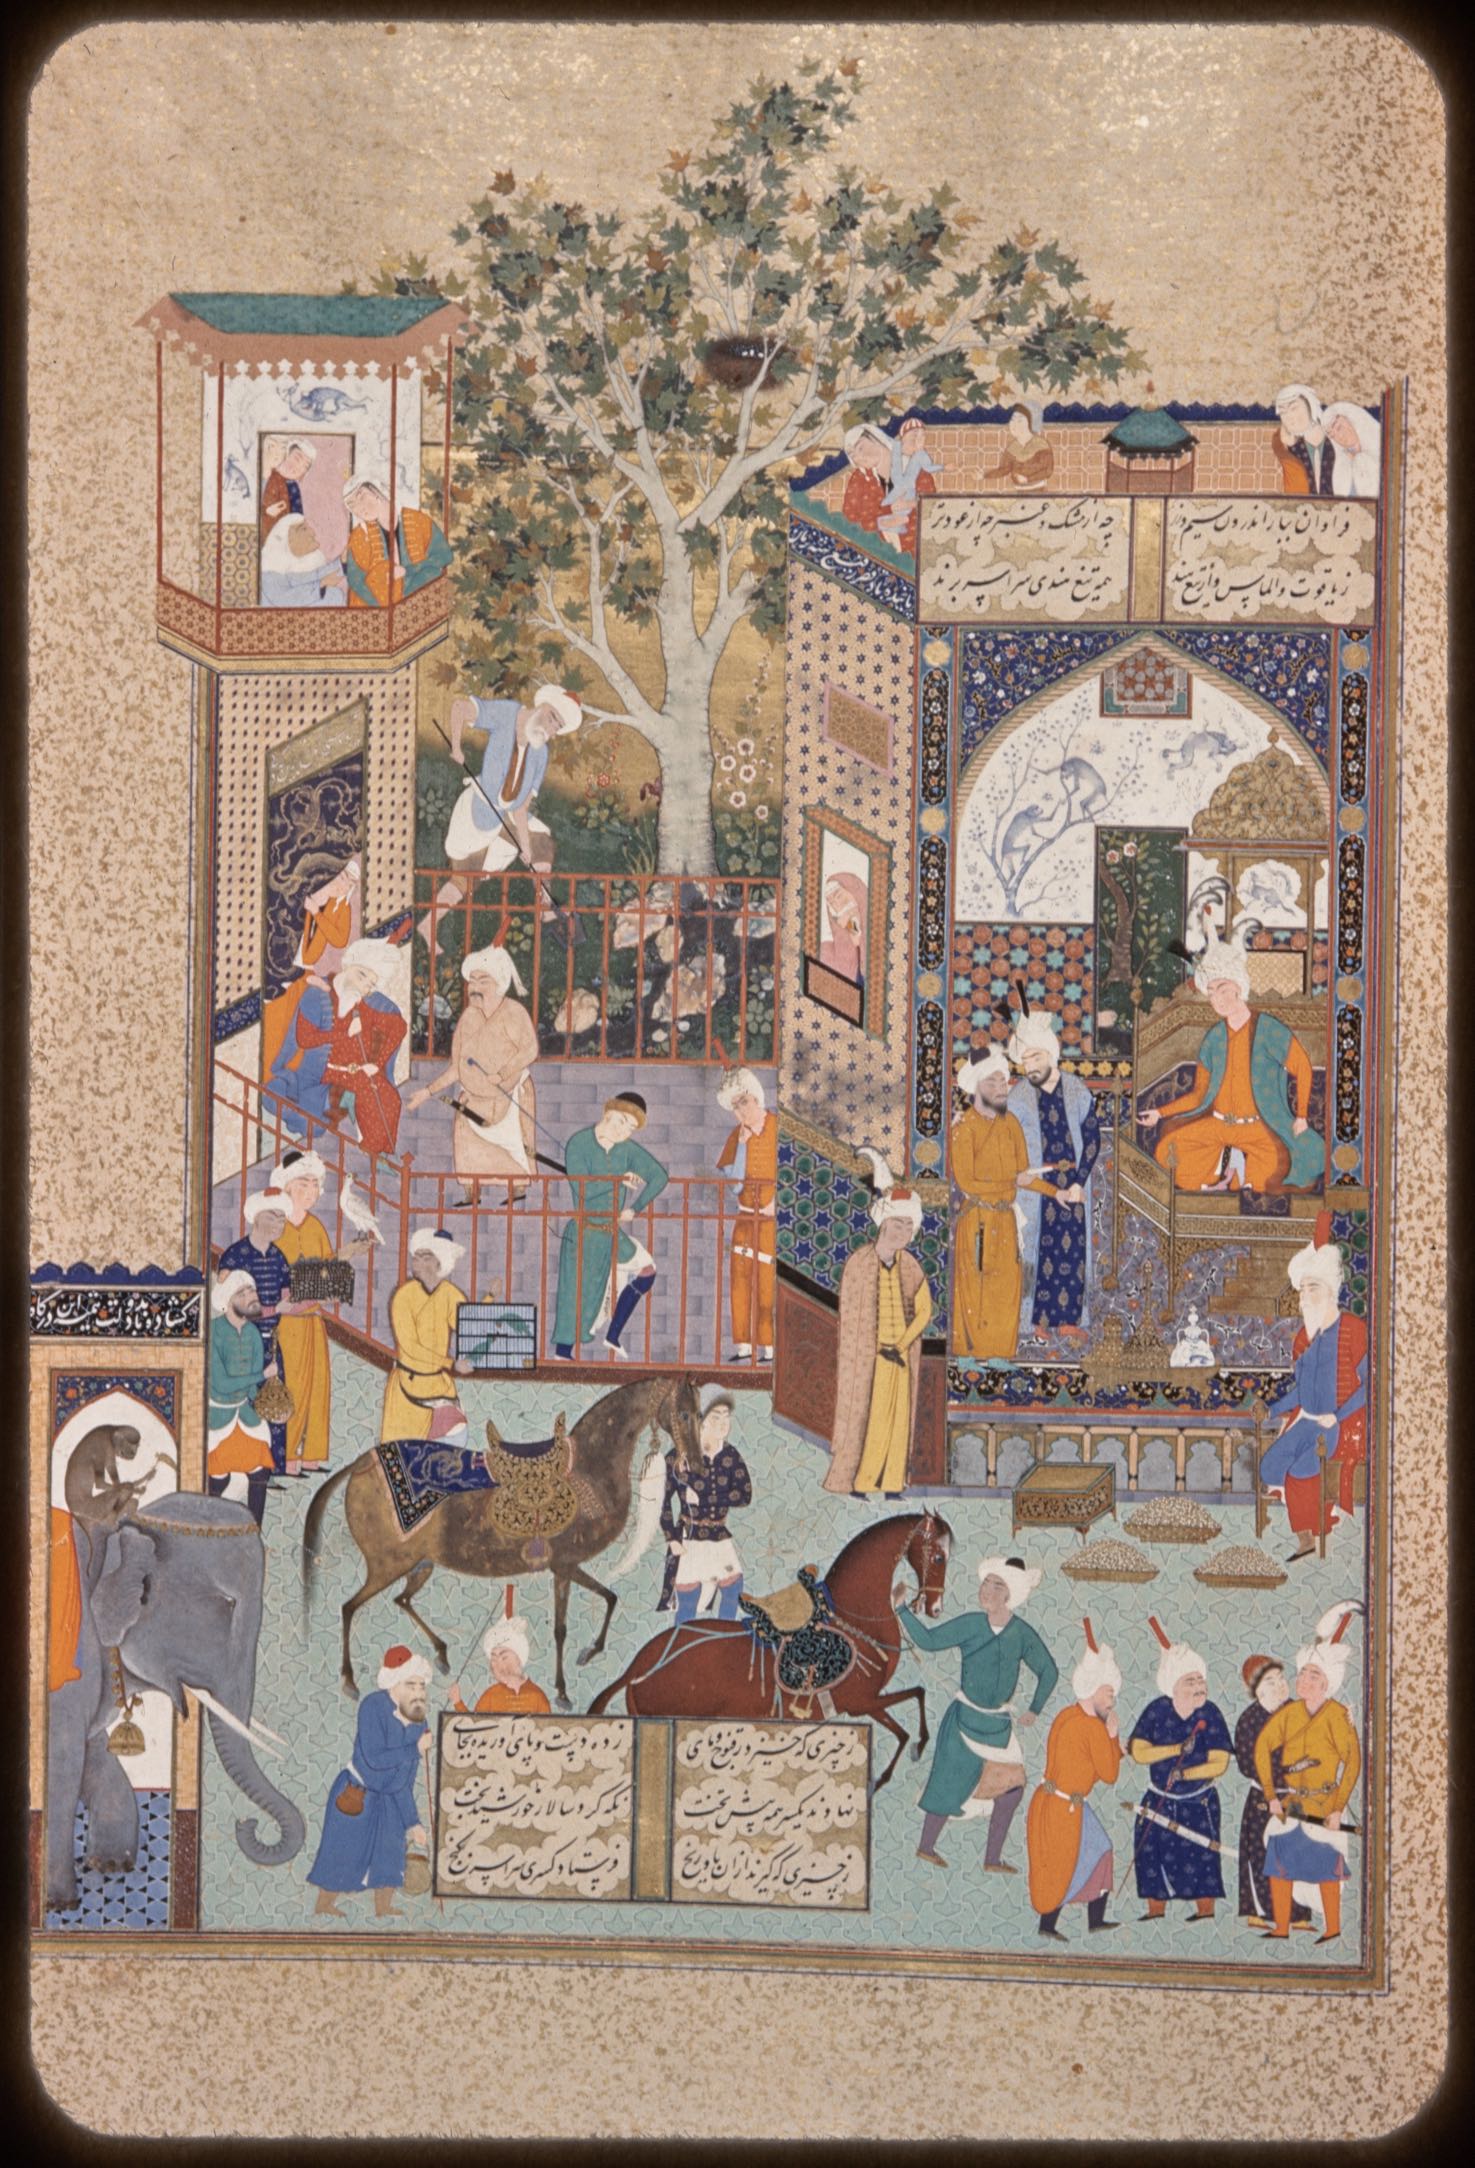 Khusrow I Nushirvan Receives an Embassy from the Raja of Hind (Private Collection), f. 638r from the Houghton Shahnama